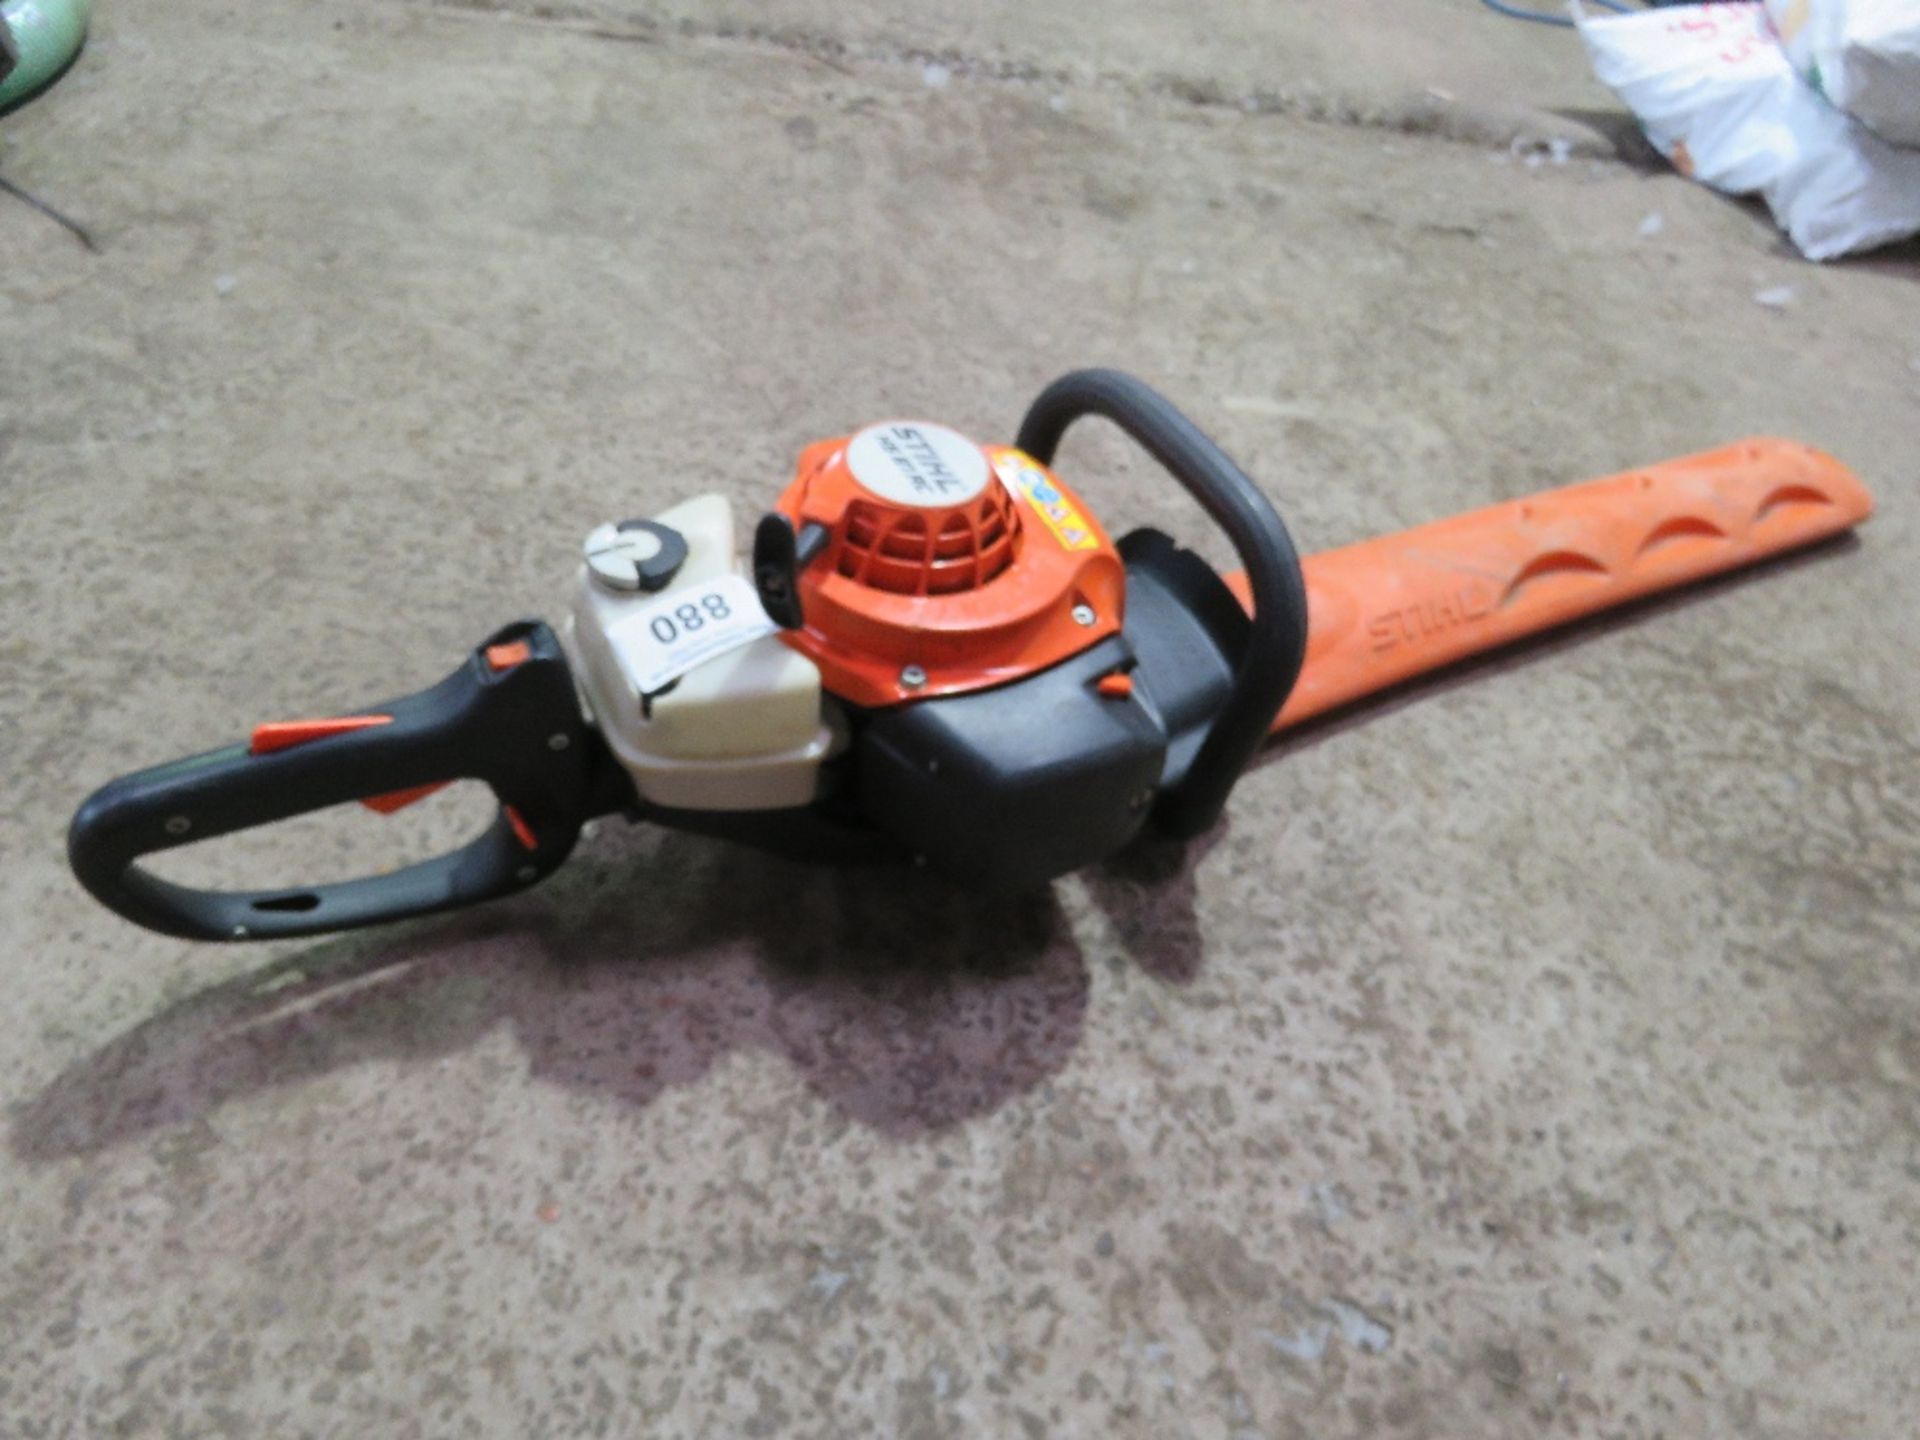 STIHL HS81RC PROFESSIONAL PETROL HEDGE CUTTER. - Image 2 of 5